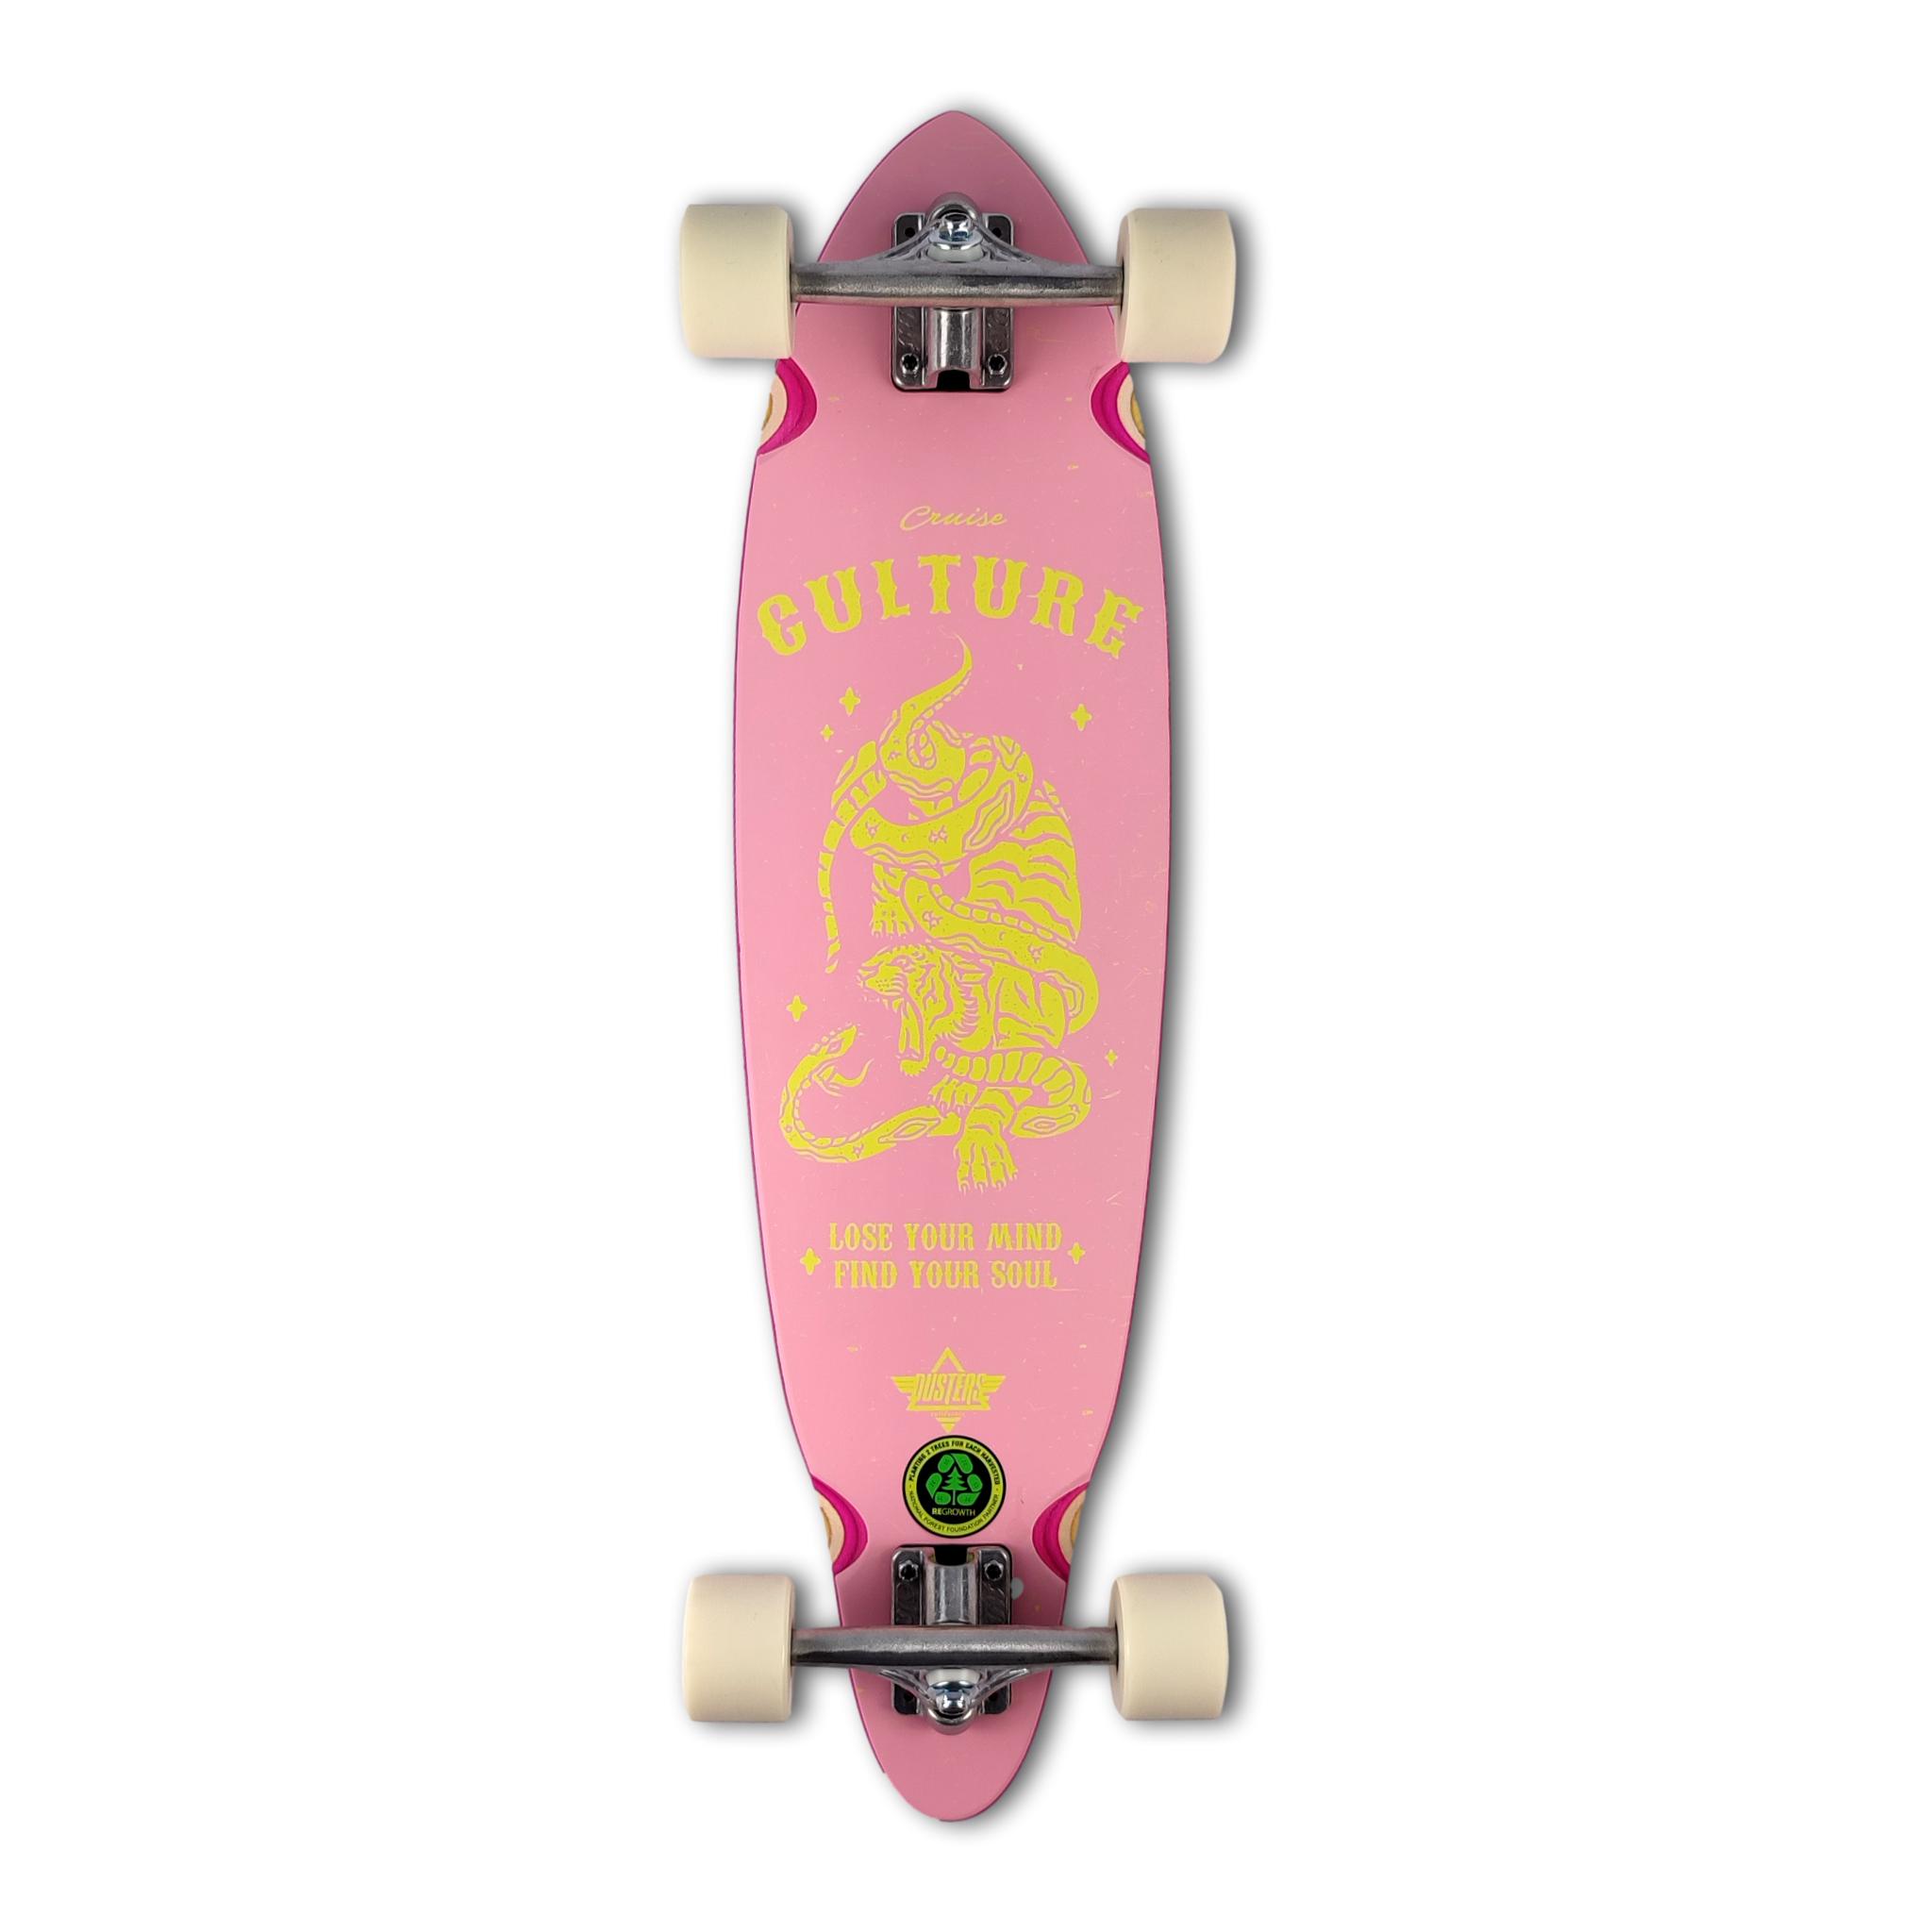 Dusters culture pink yellow longboard 33